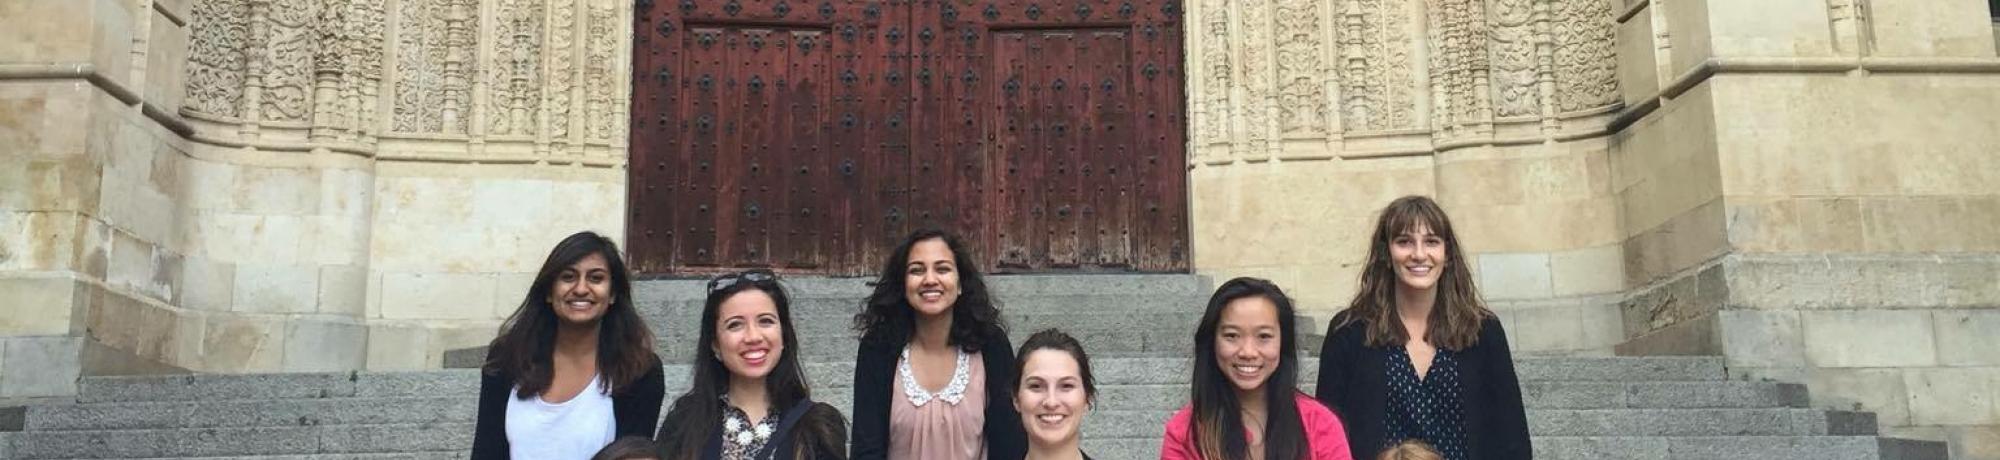 Students taking part  in medieval Spain study abroad course.